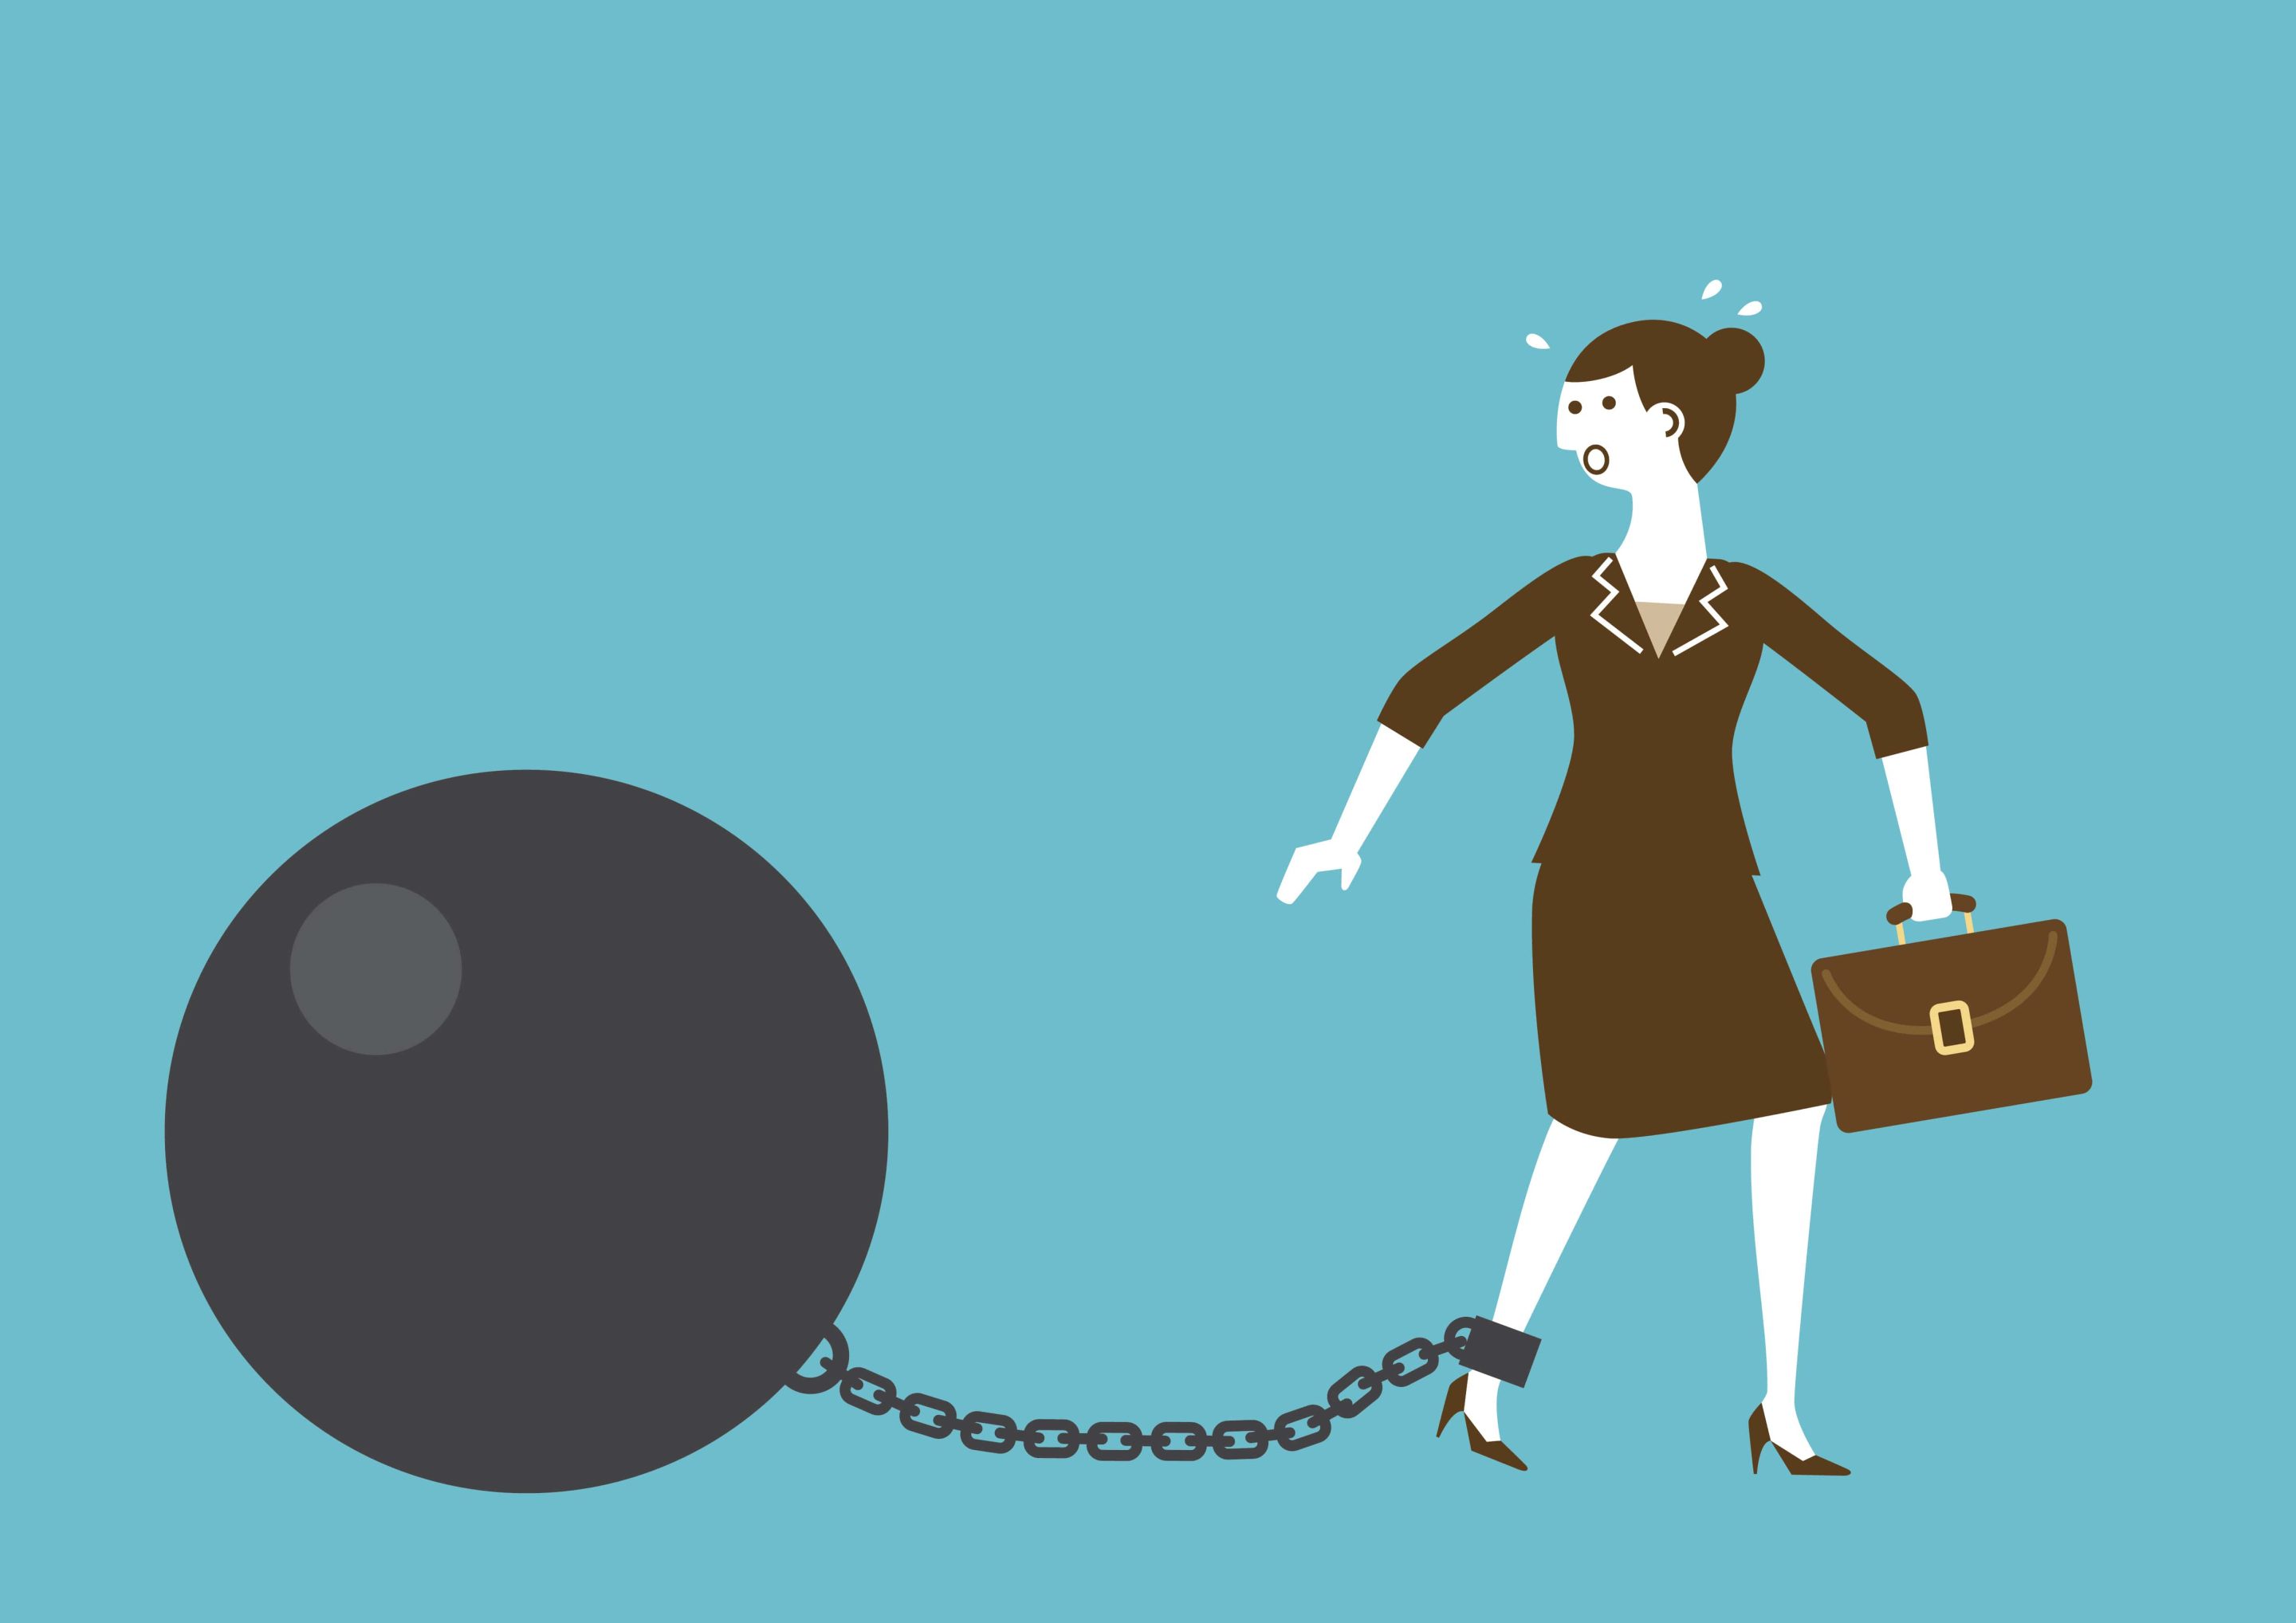 An illustration of a woman connected to a large ball and chain